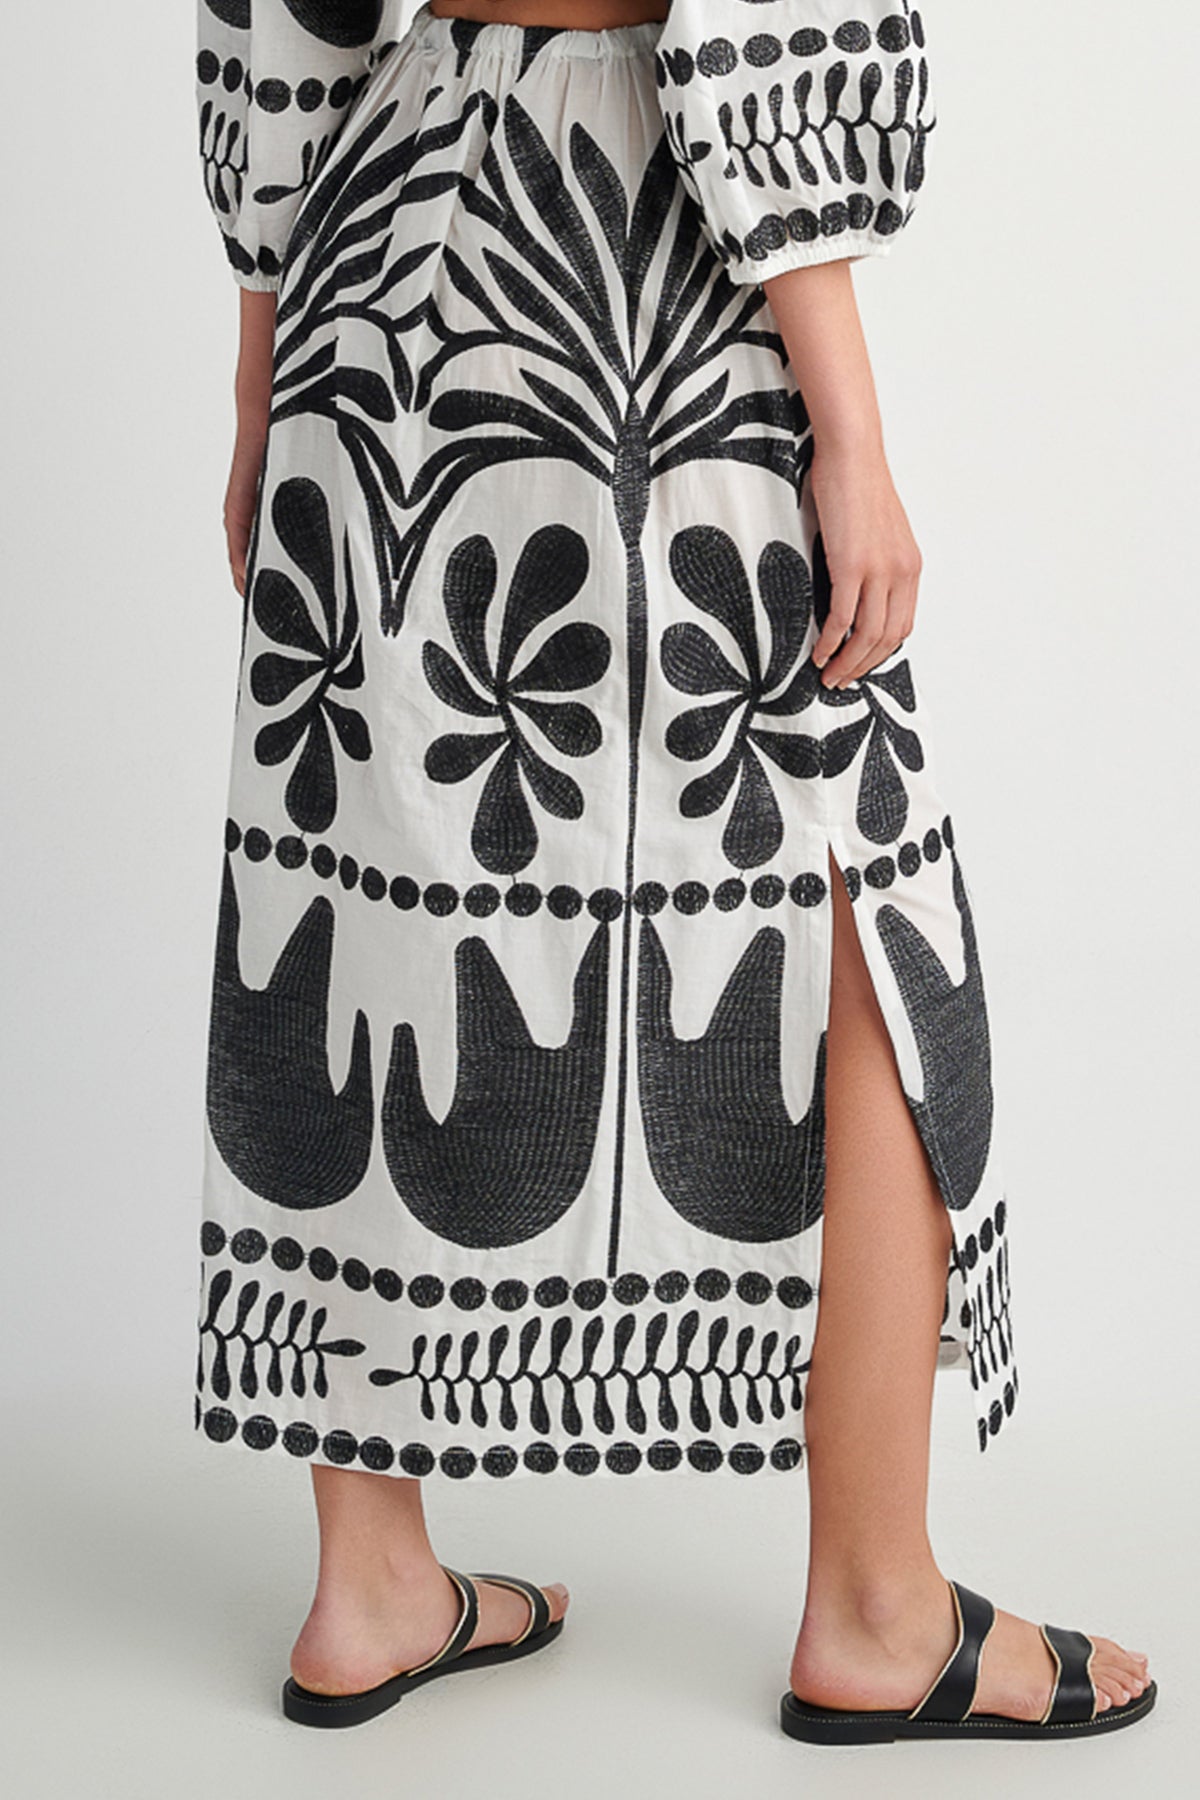 LONG EMBROIDERED SKIRT "ITHACA"